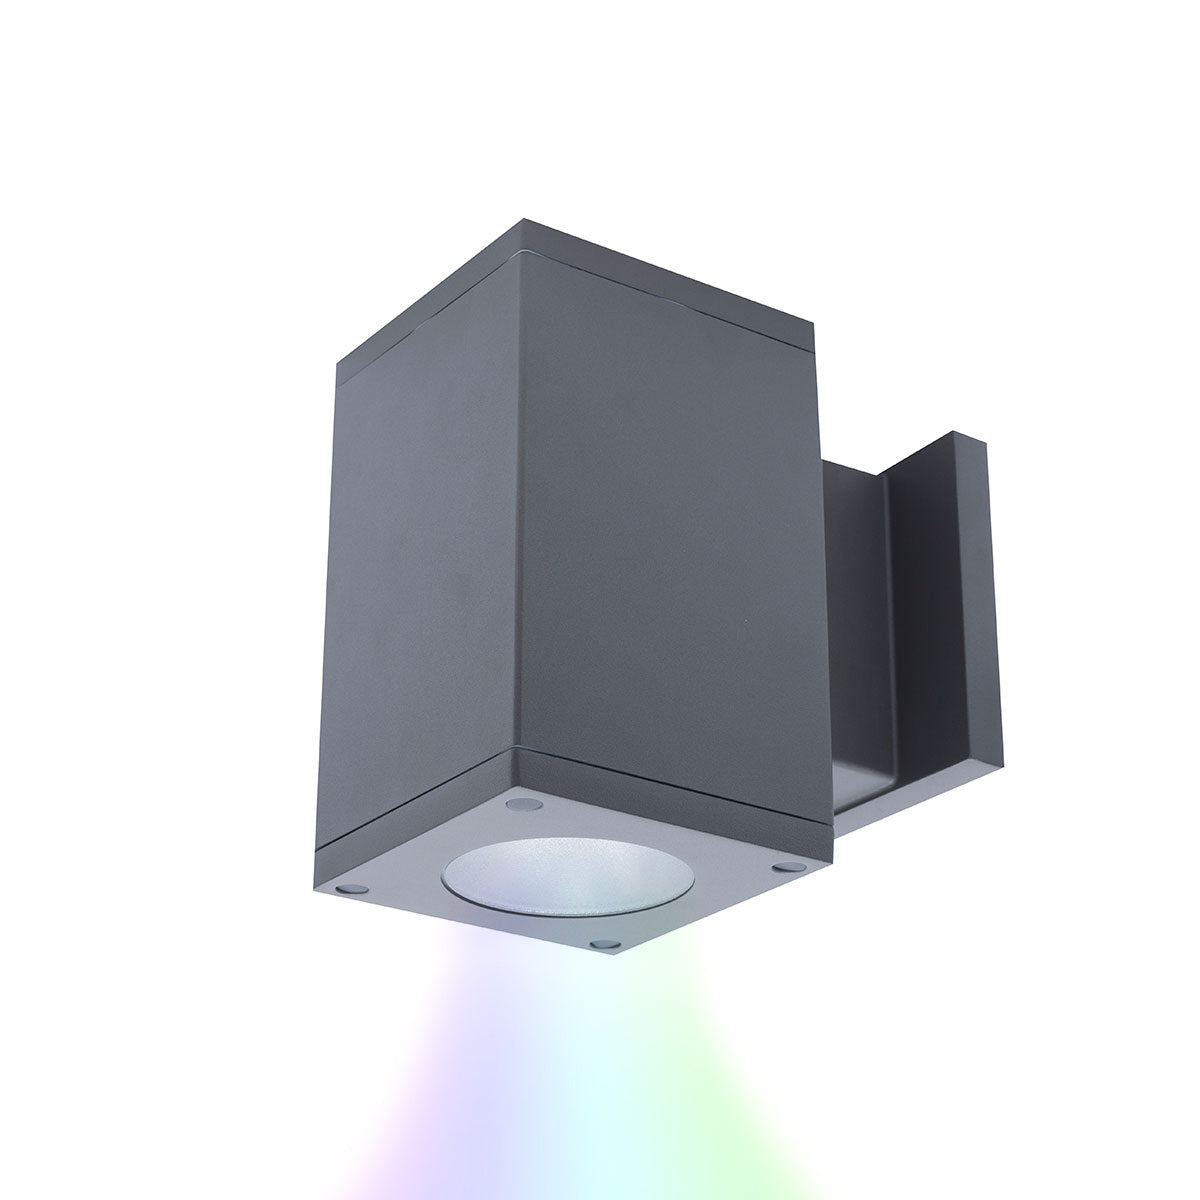 W.A.C. Canada - LED Wall Light - Cube Arch - Graphite- Union Lighting Luminaires Decor